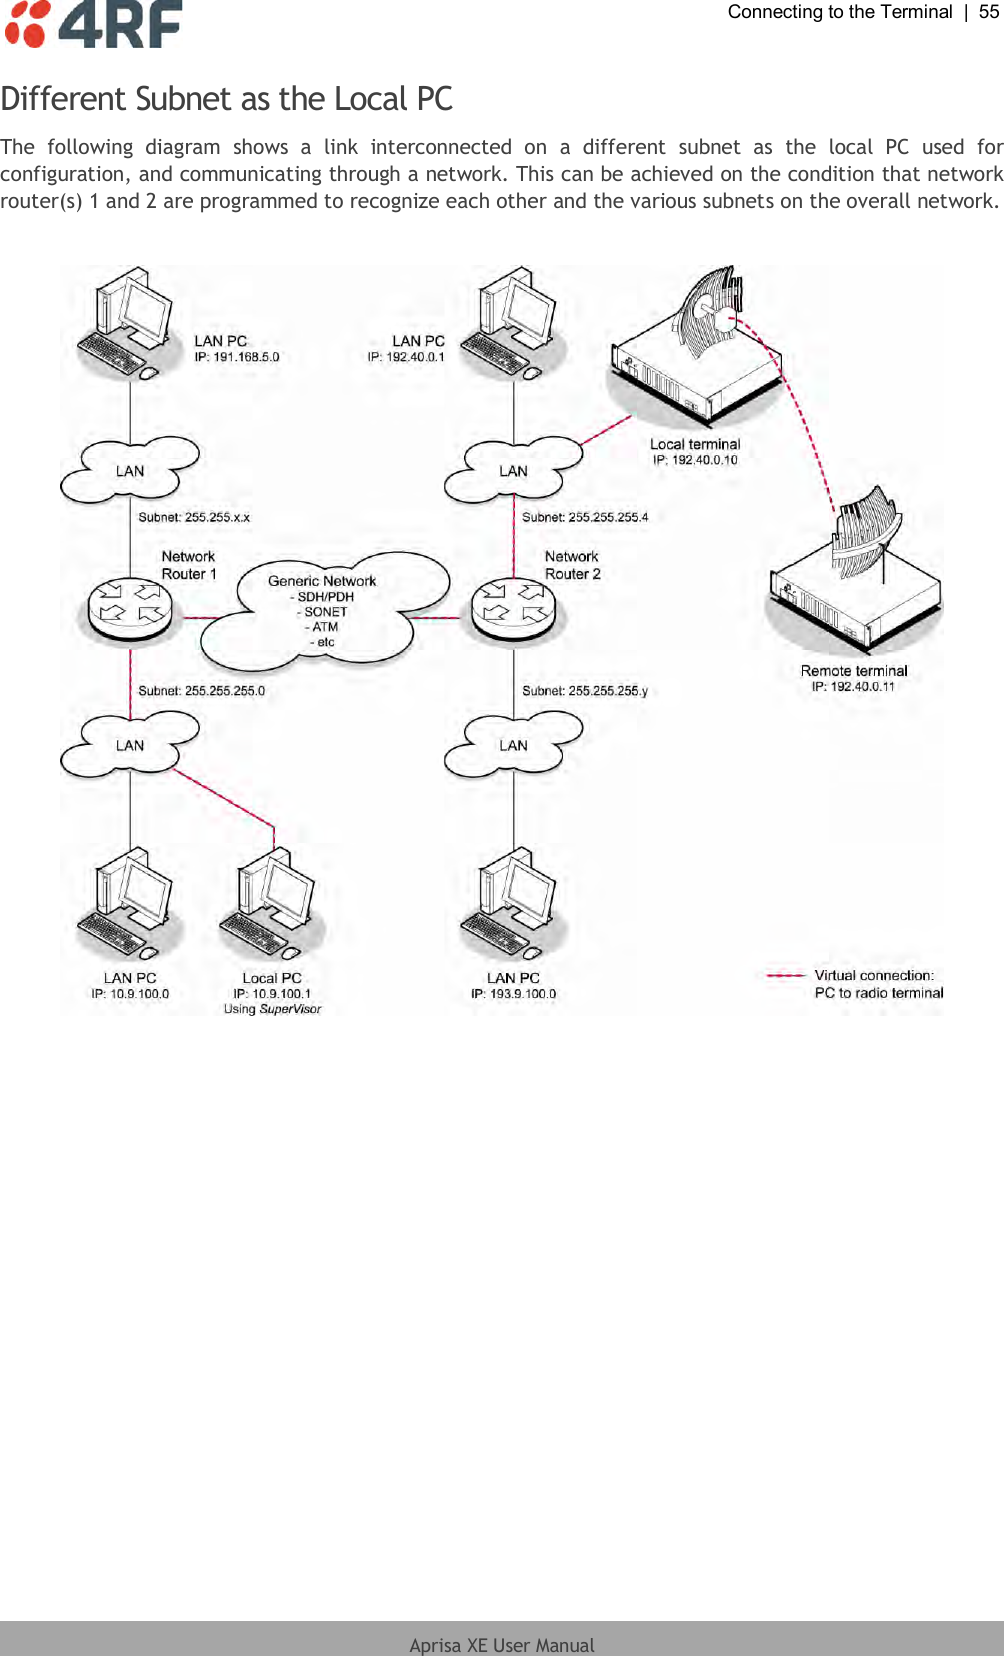  Connecting to the Terminal  |  55  Aprisa XE User Manual  Different Subnet as the Local PC The  following  diagram  shows  a  link  interconnected  on  a  different  subnet  as  the  local  PC  used  for configuration, and communicating through a network. This can be achieved on the condition that network router(s) 1 and 2 are programmed to recognize each other and the various subnets on the overall network.     